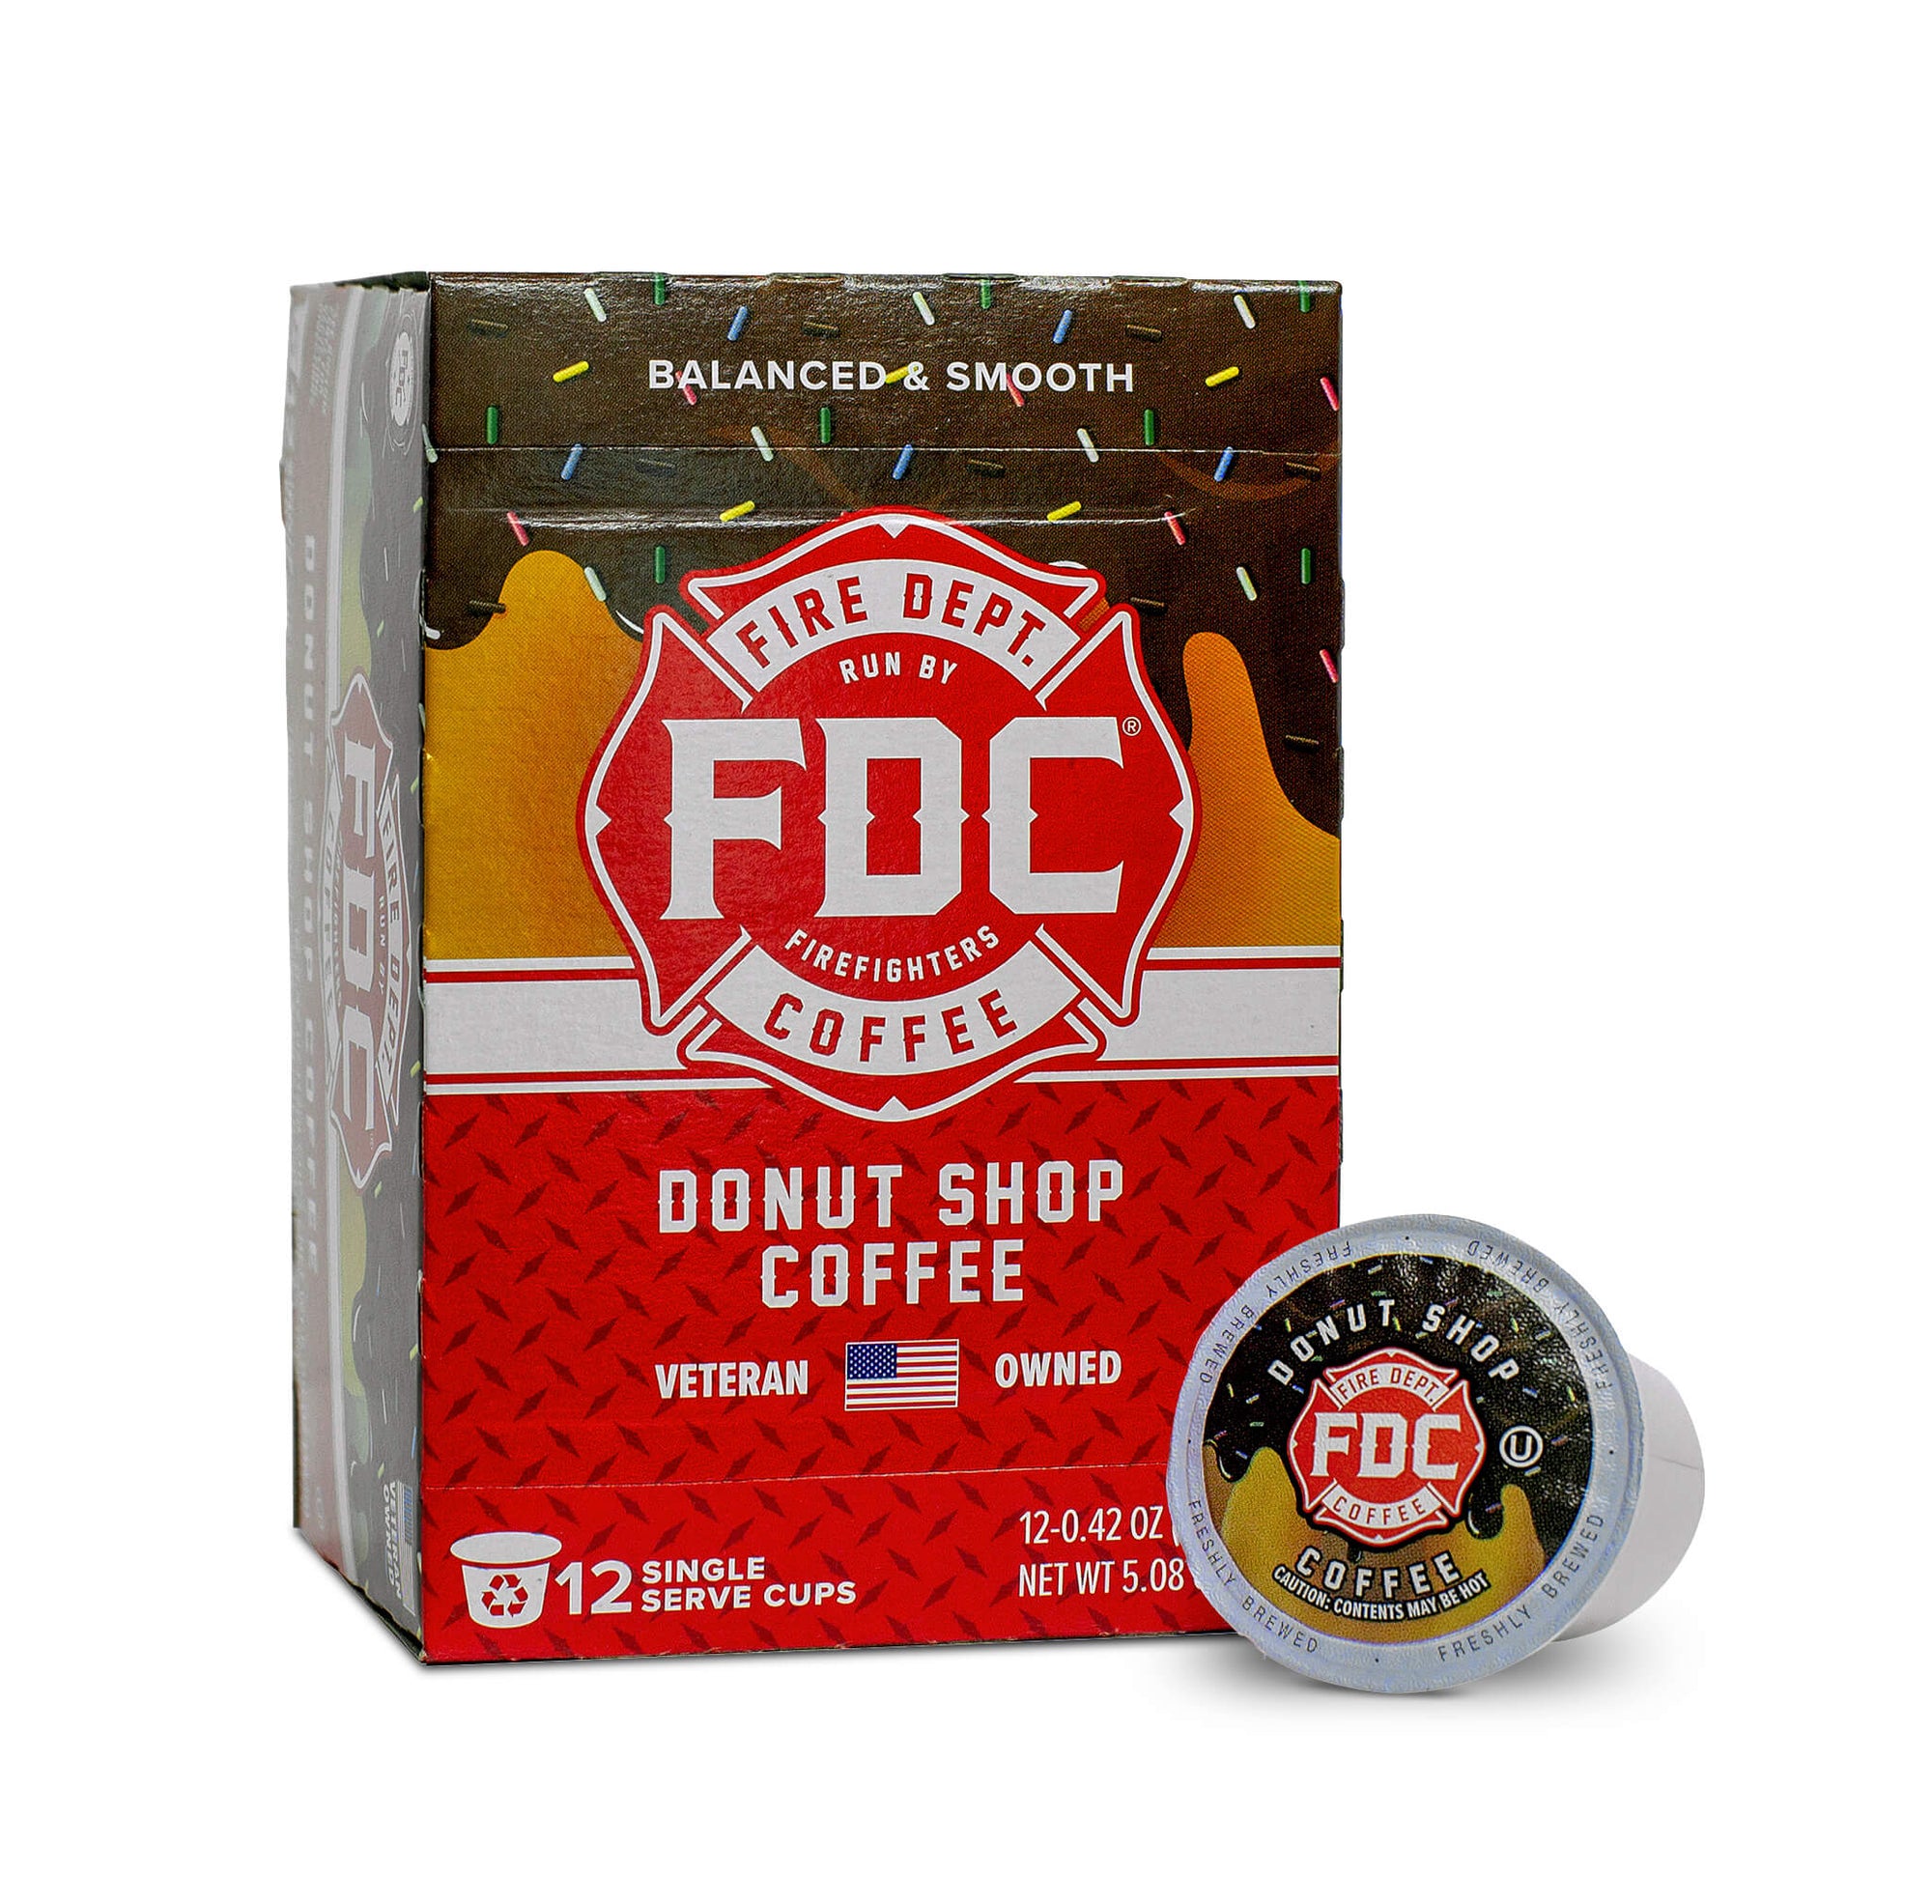 A 12 count box of Fire Department Coffee's Donut Shop Coffee Pods with a fun donut design on the box.